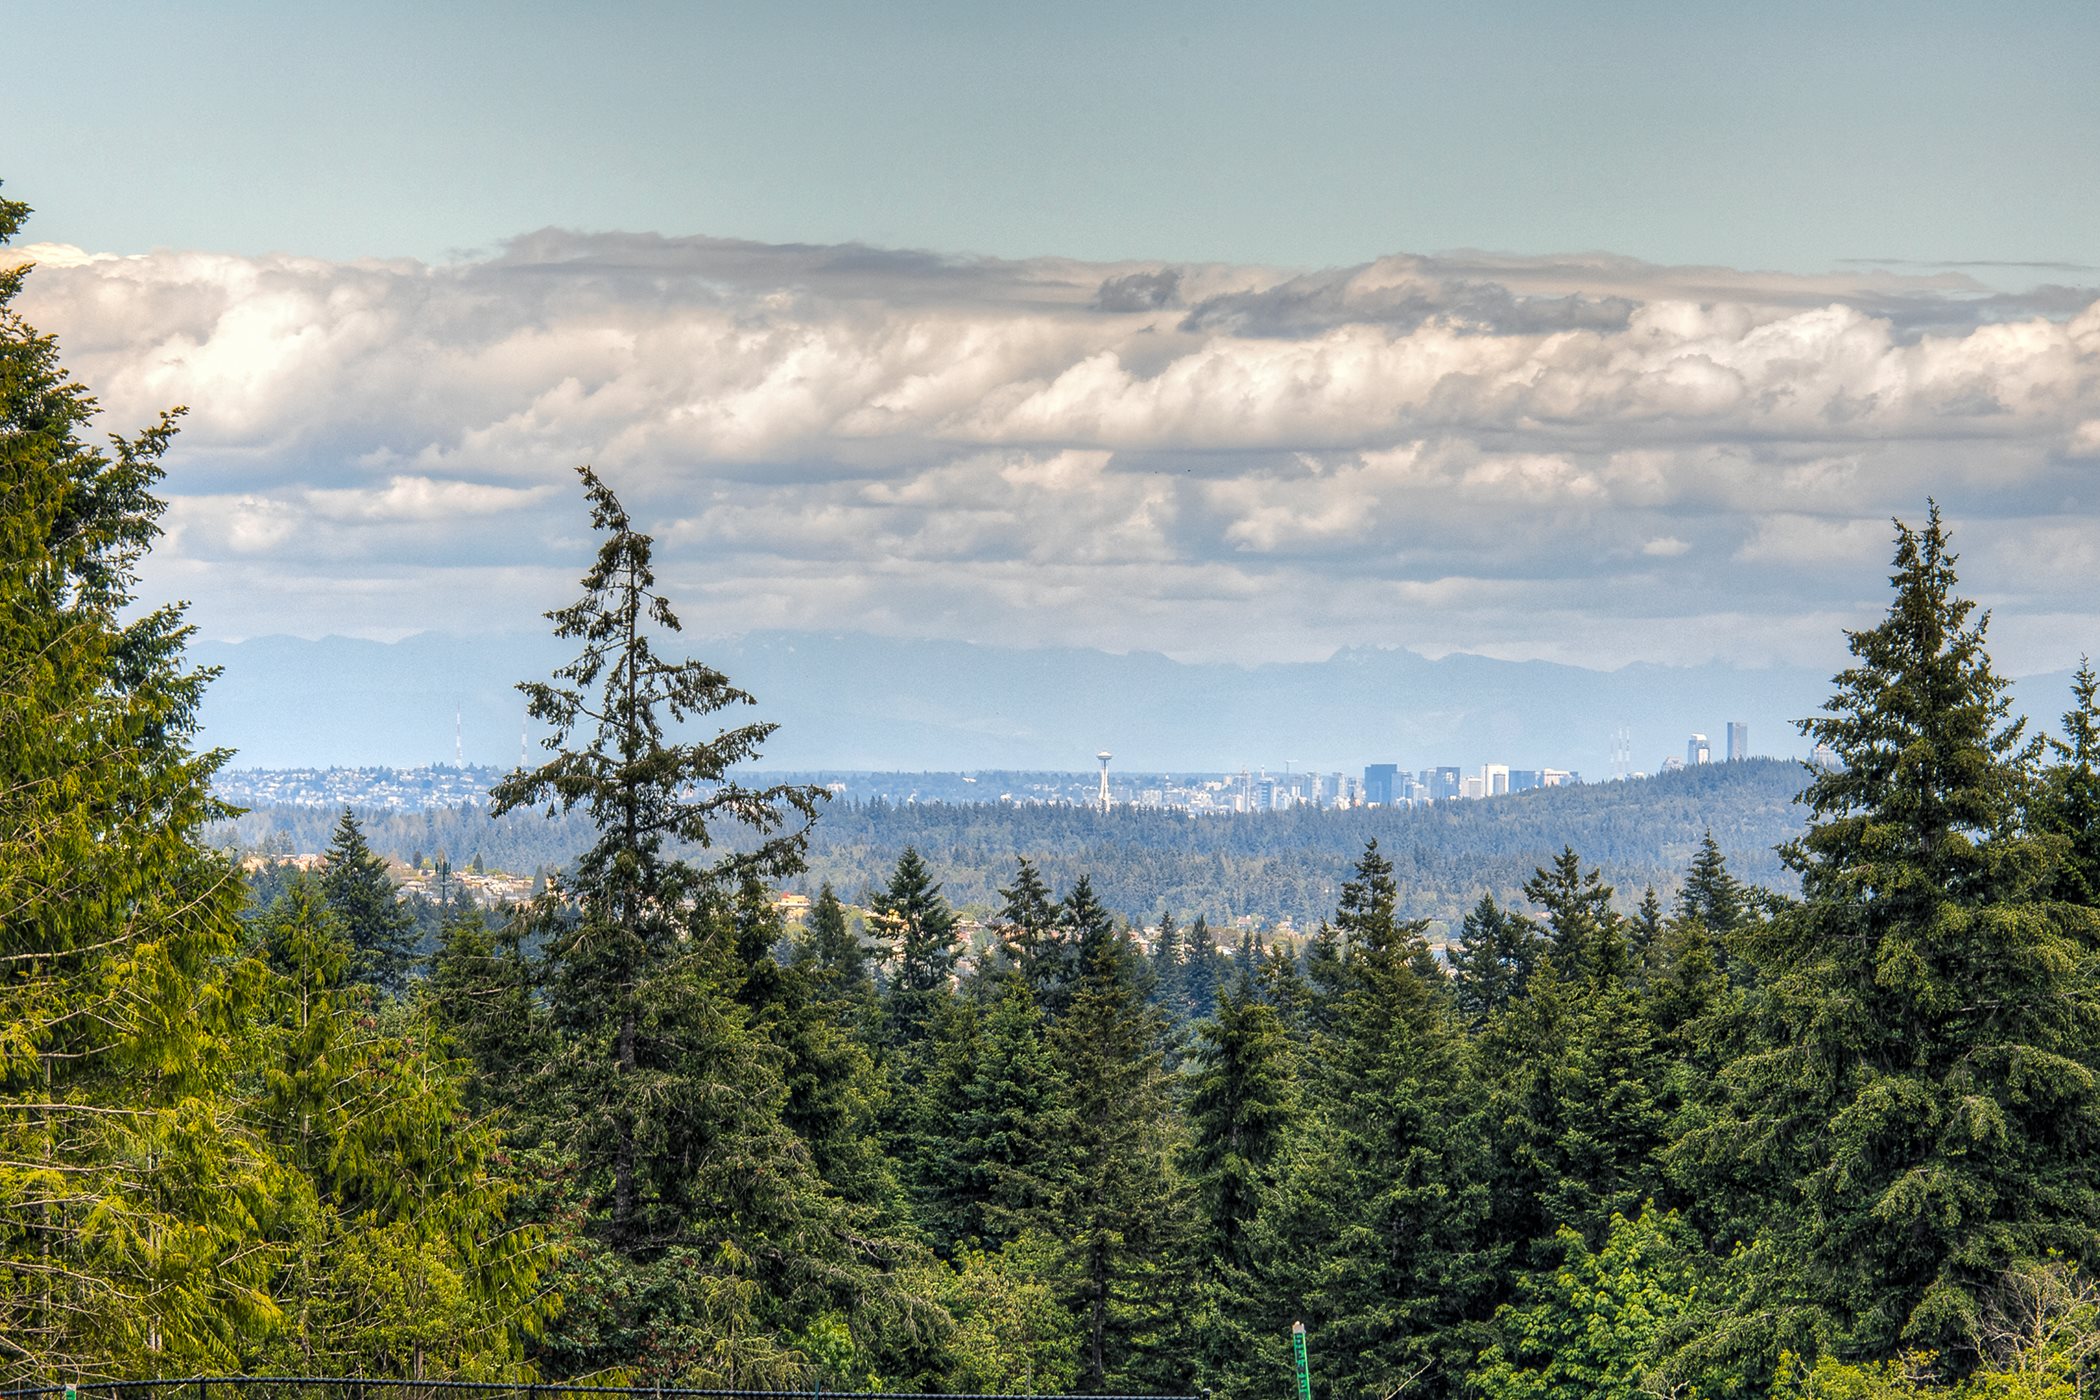 View of pine trees with Seattle metro in background